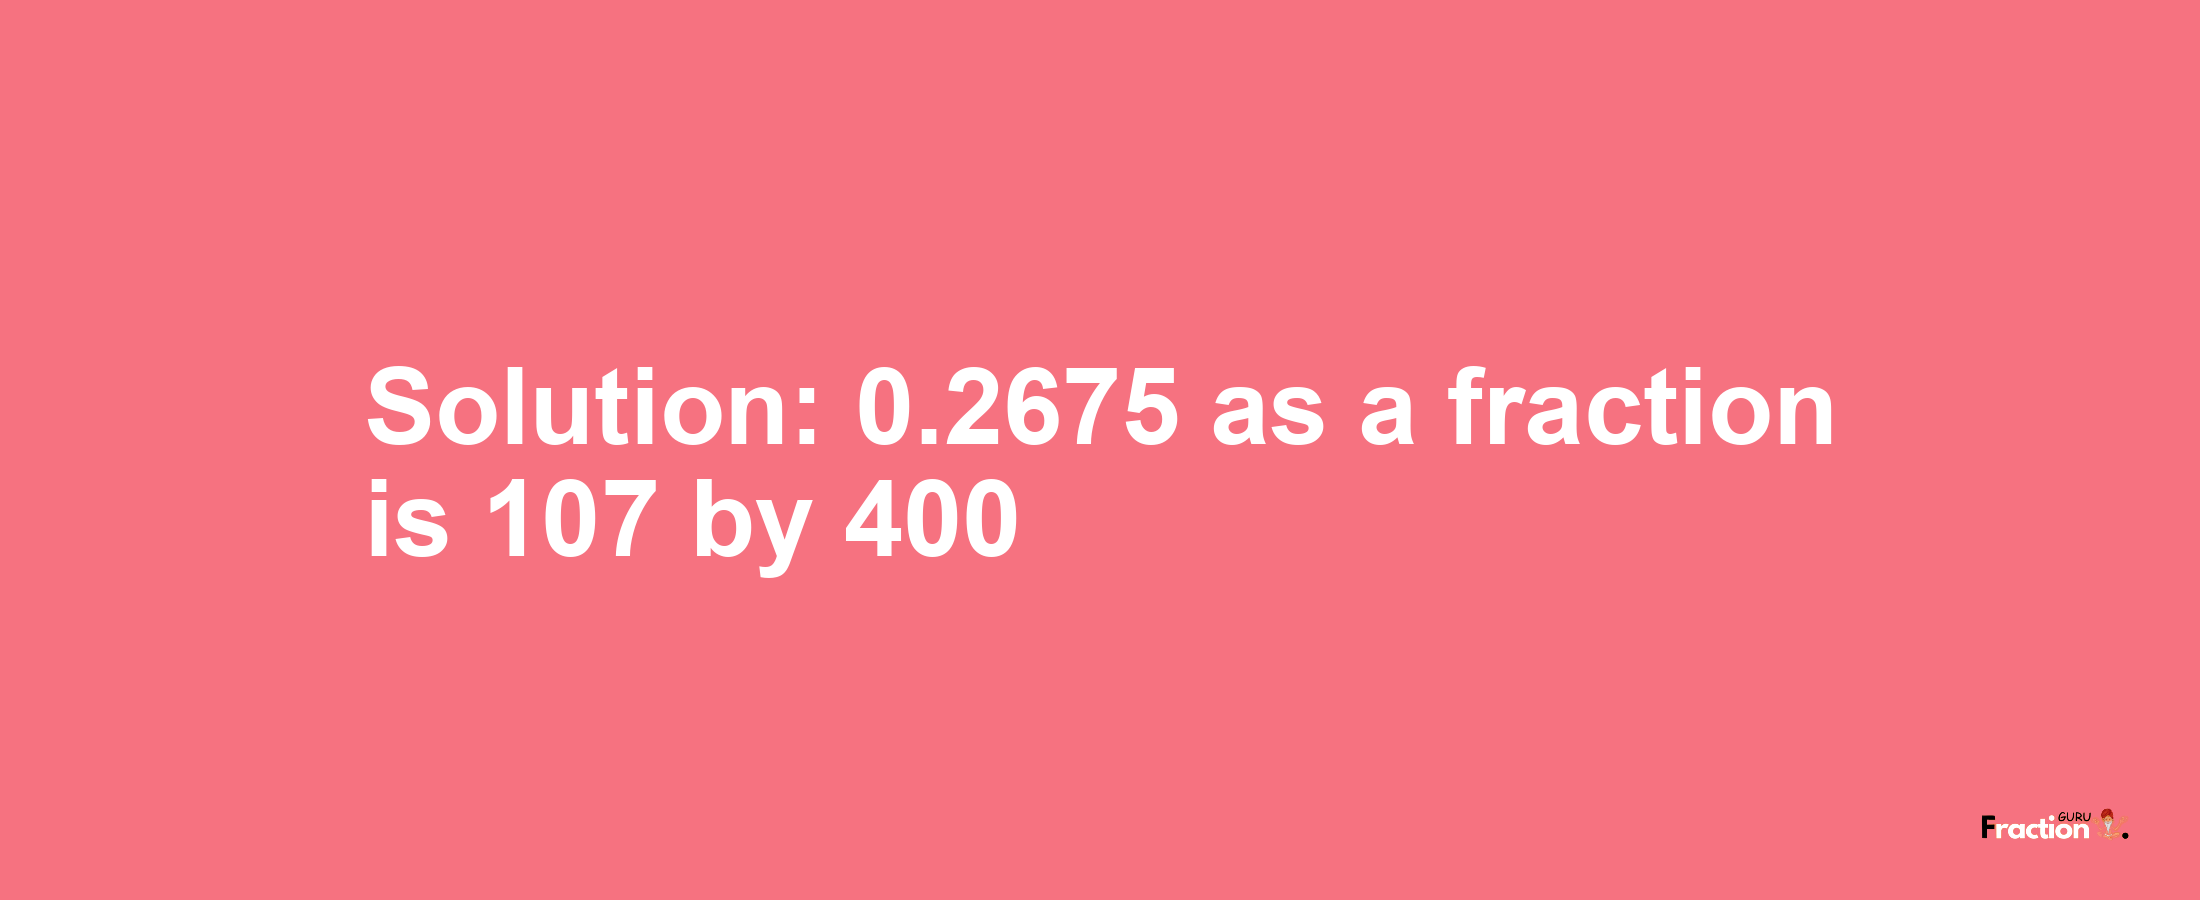 Solution:0.2675 as a fraction is 107/400